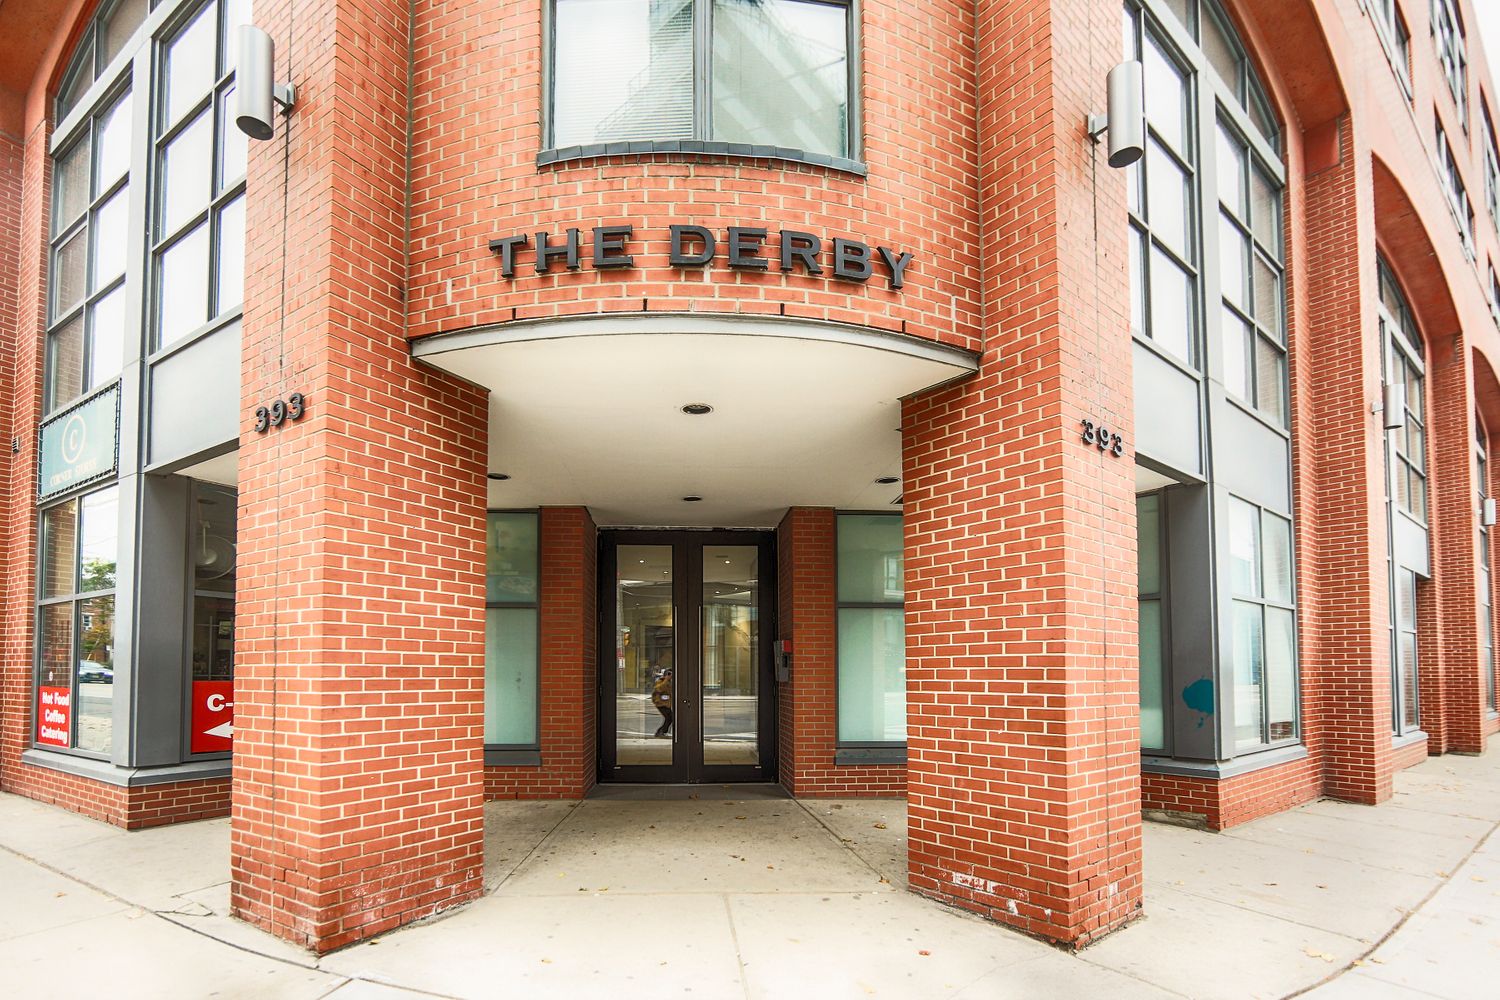 393 King Street E. The Derby Lofts is located in  Downtown, Toronto - image #4 of 4